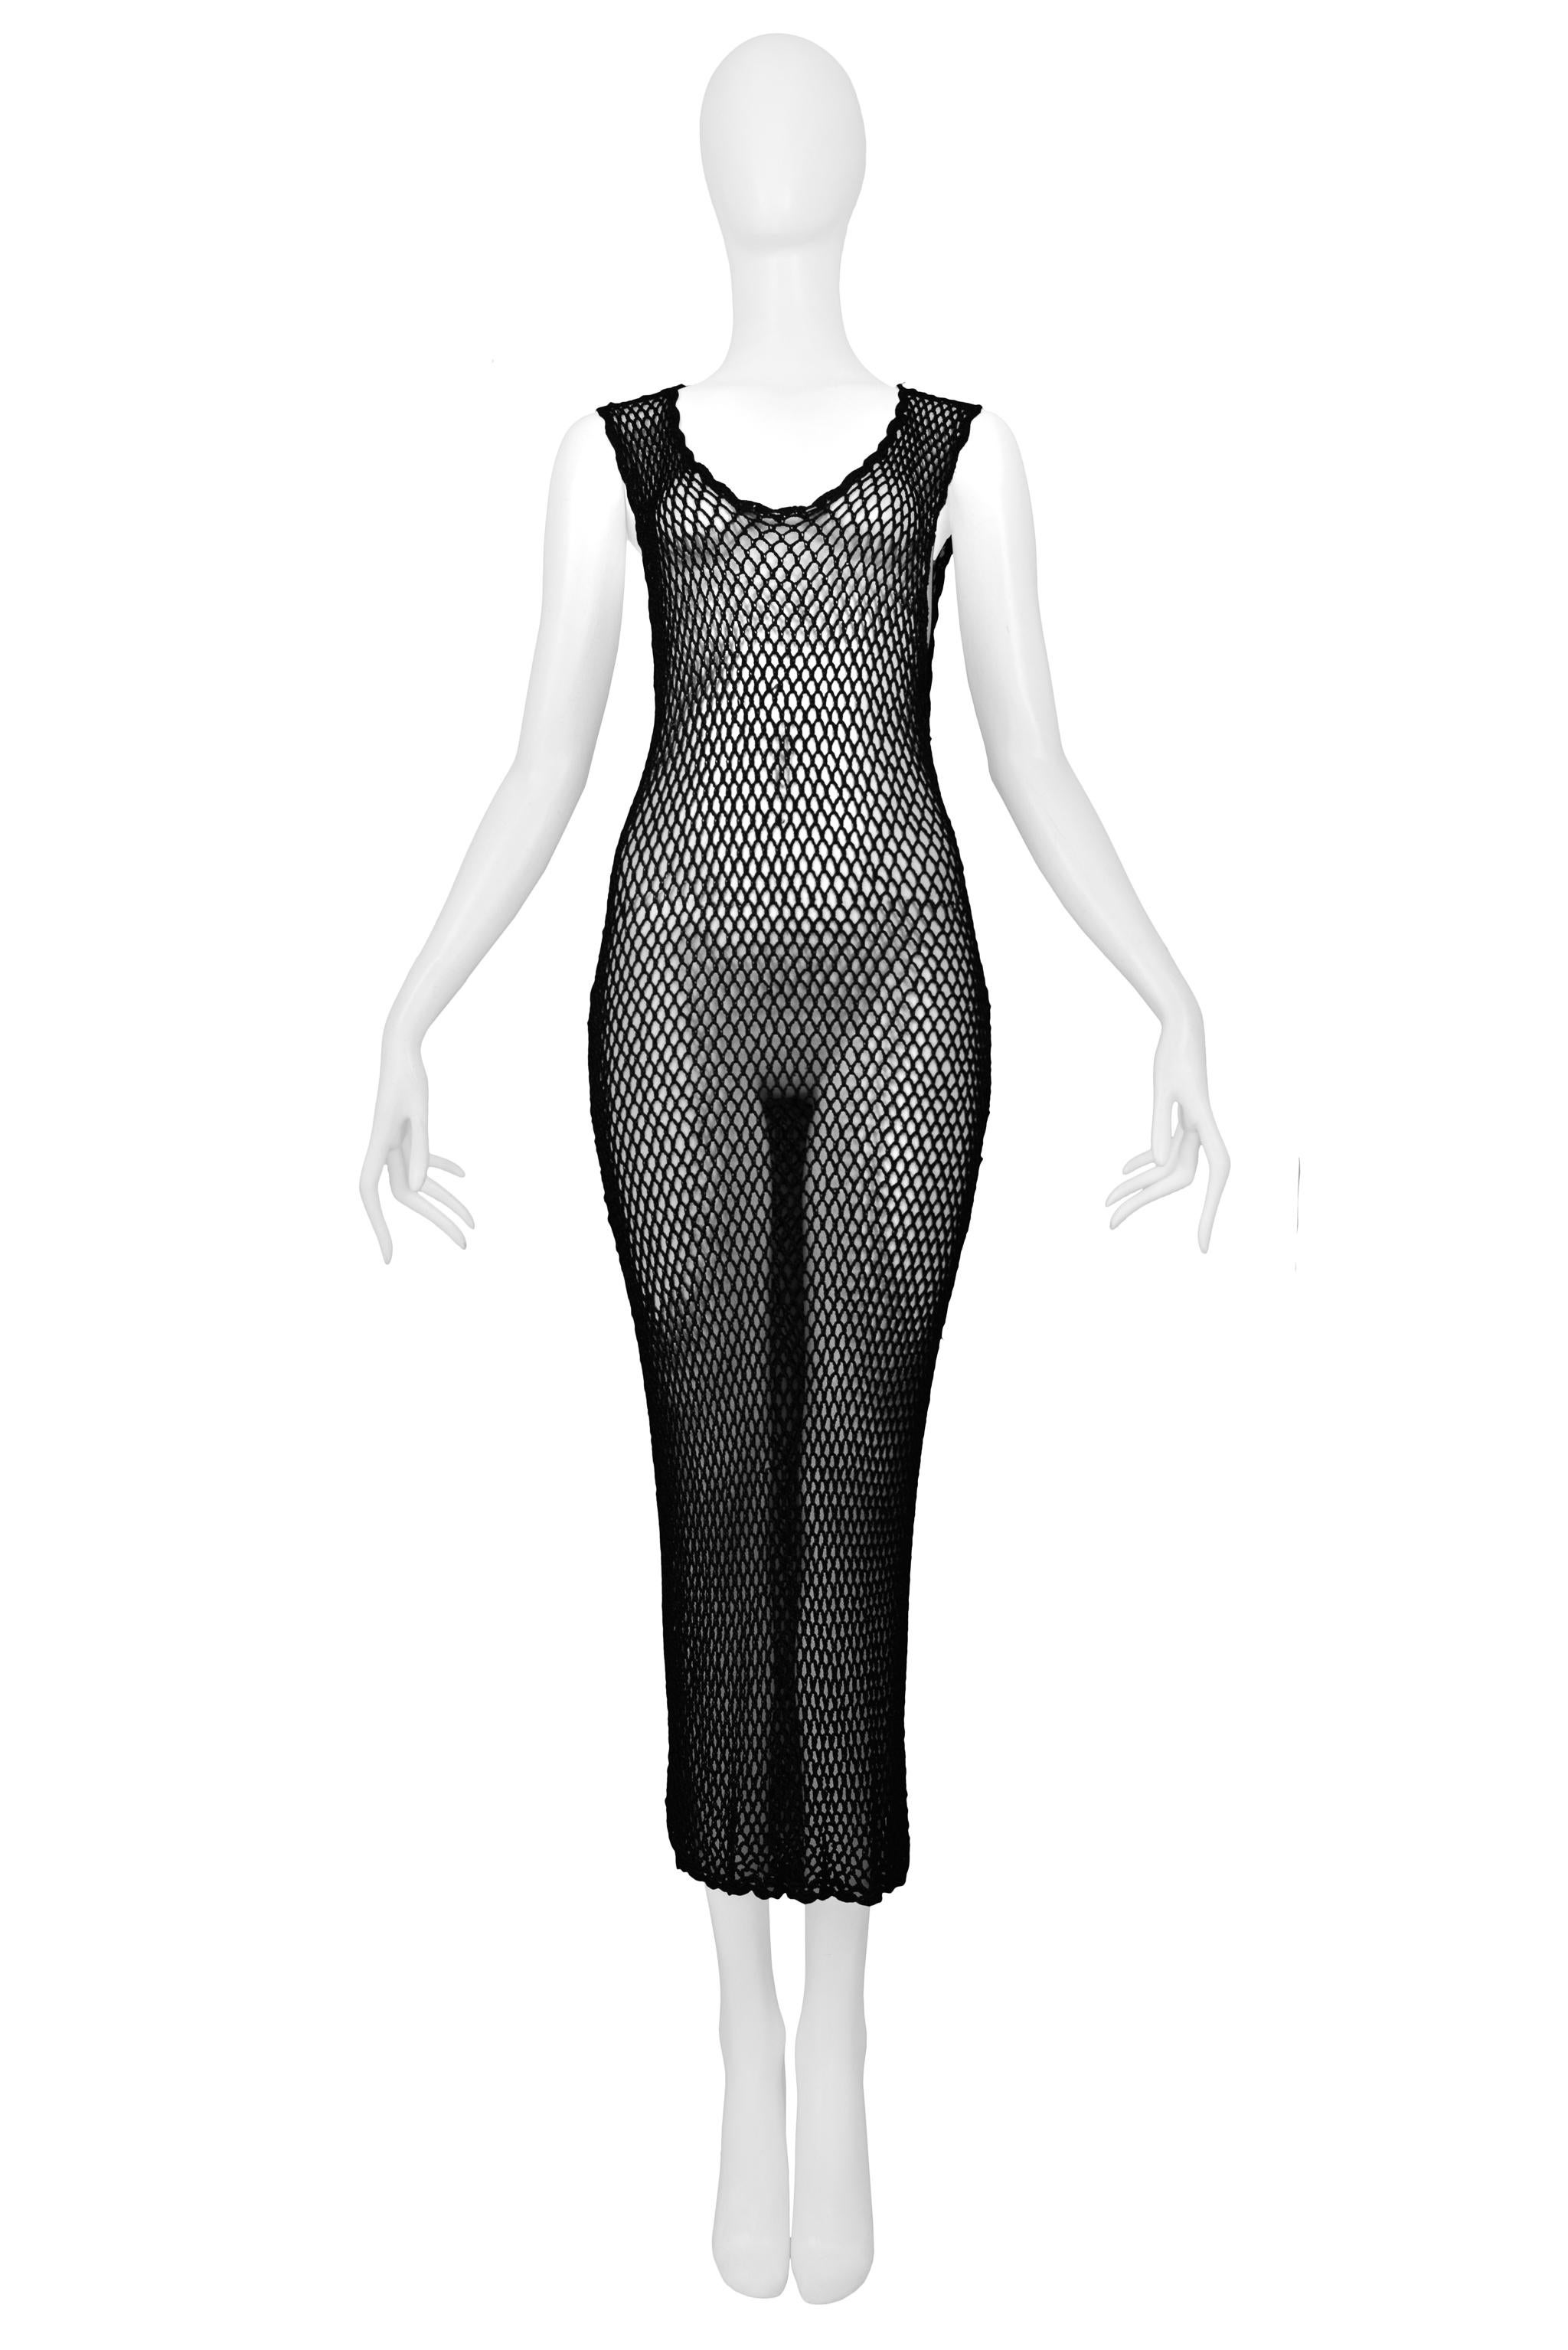 Resurrection Vintage is excited to offer a vintage Dolce & Gabbana black fishnet dress with a scoop neckline, scalloped edges, and keyhole back. 

Dolce & Gabbana
Size Small
100% Viscose 
Made in Italy
1995 Collection
Excellent Vintage Condition